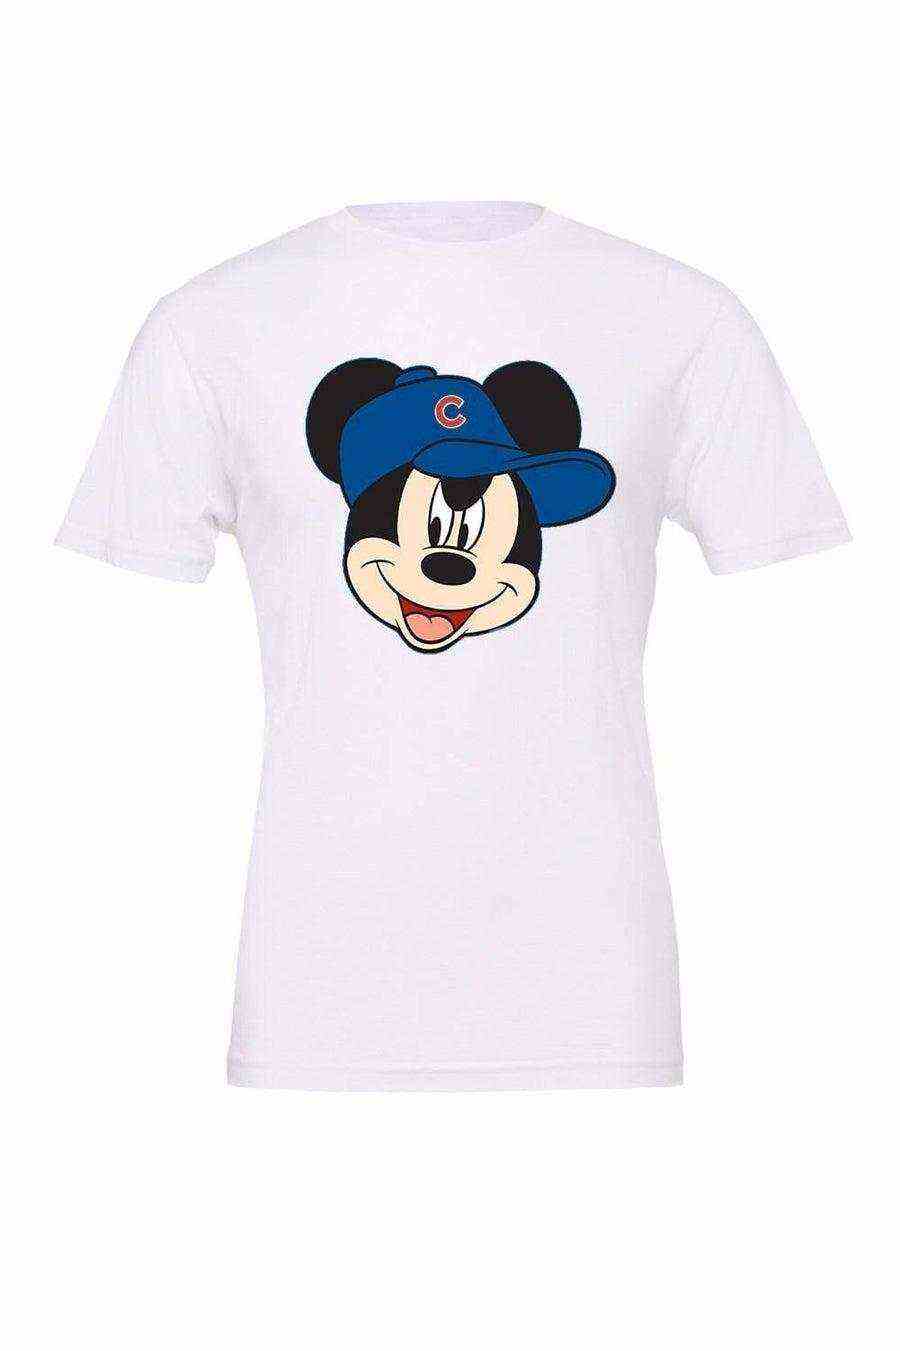 Cubs Mickey Tee | Chicago Cubs - Dylan's Tees